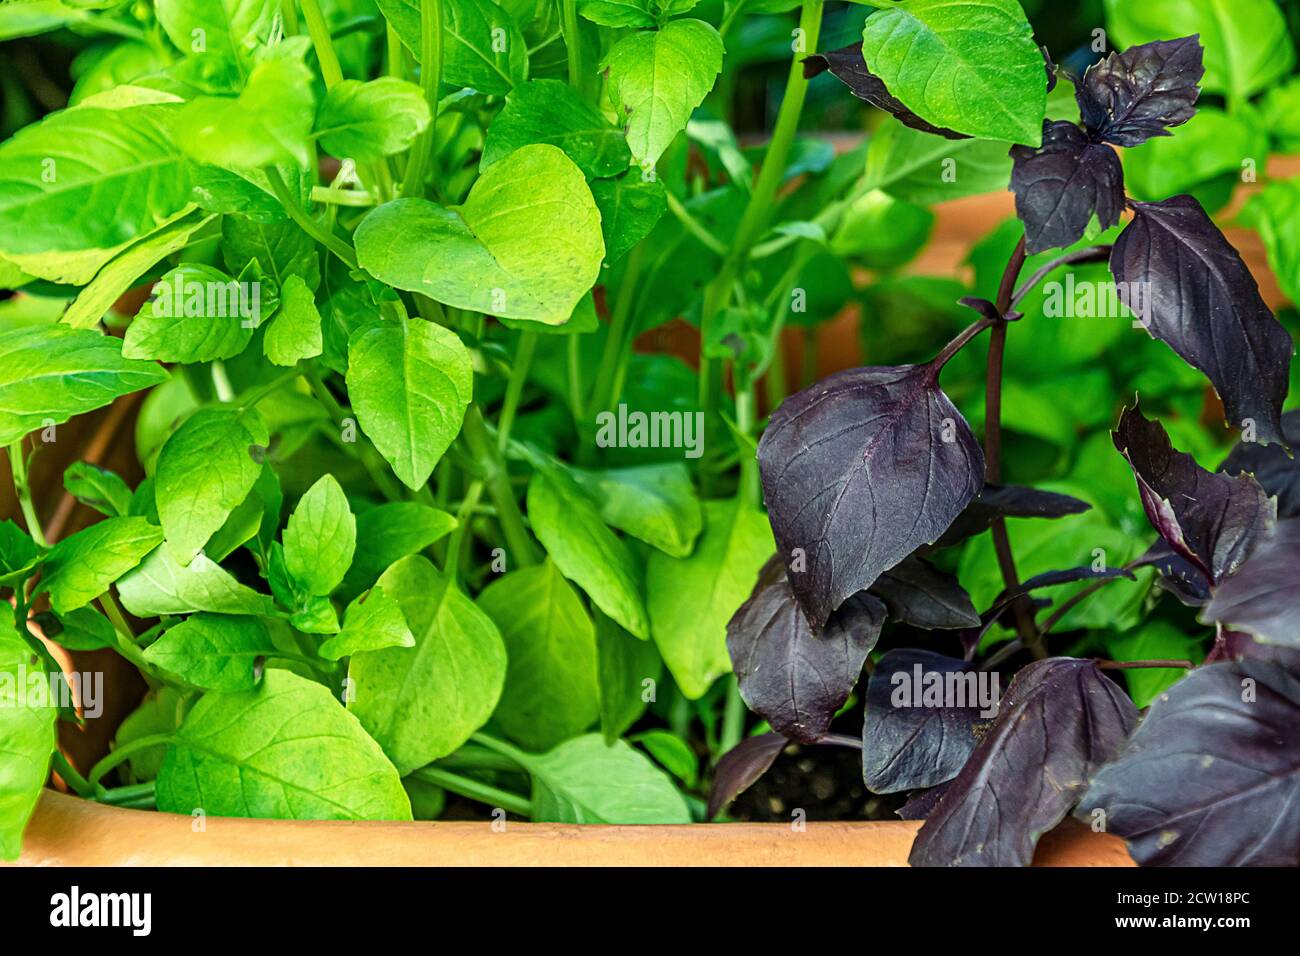 Potted green and purple Basil plants Stock Photo